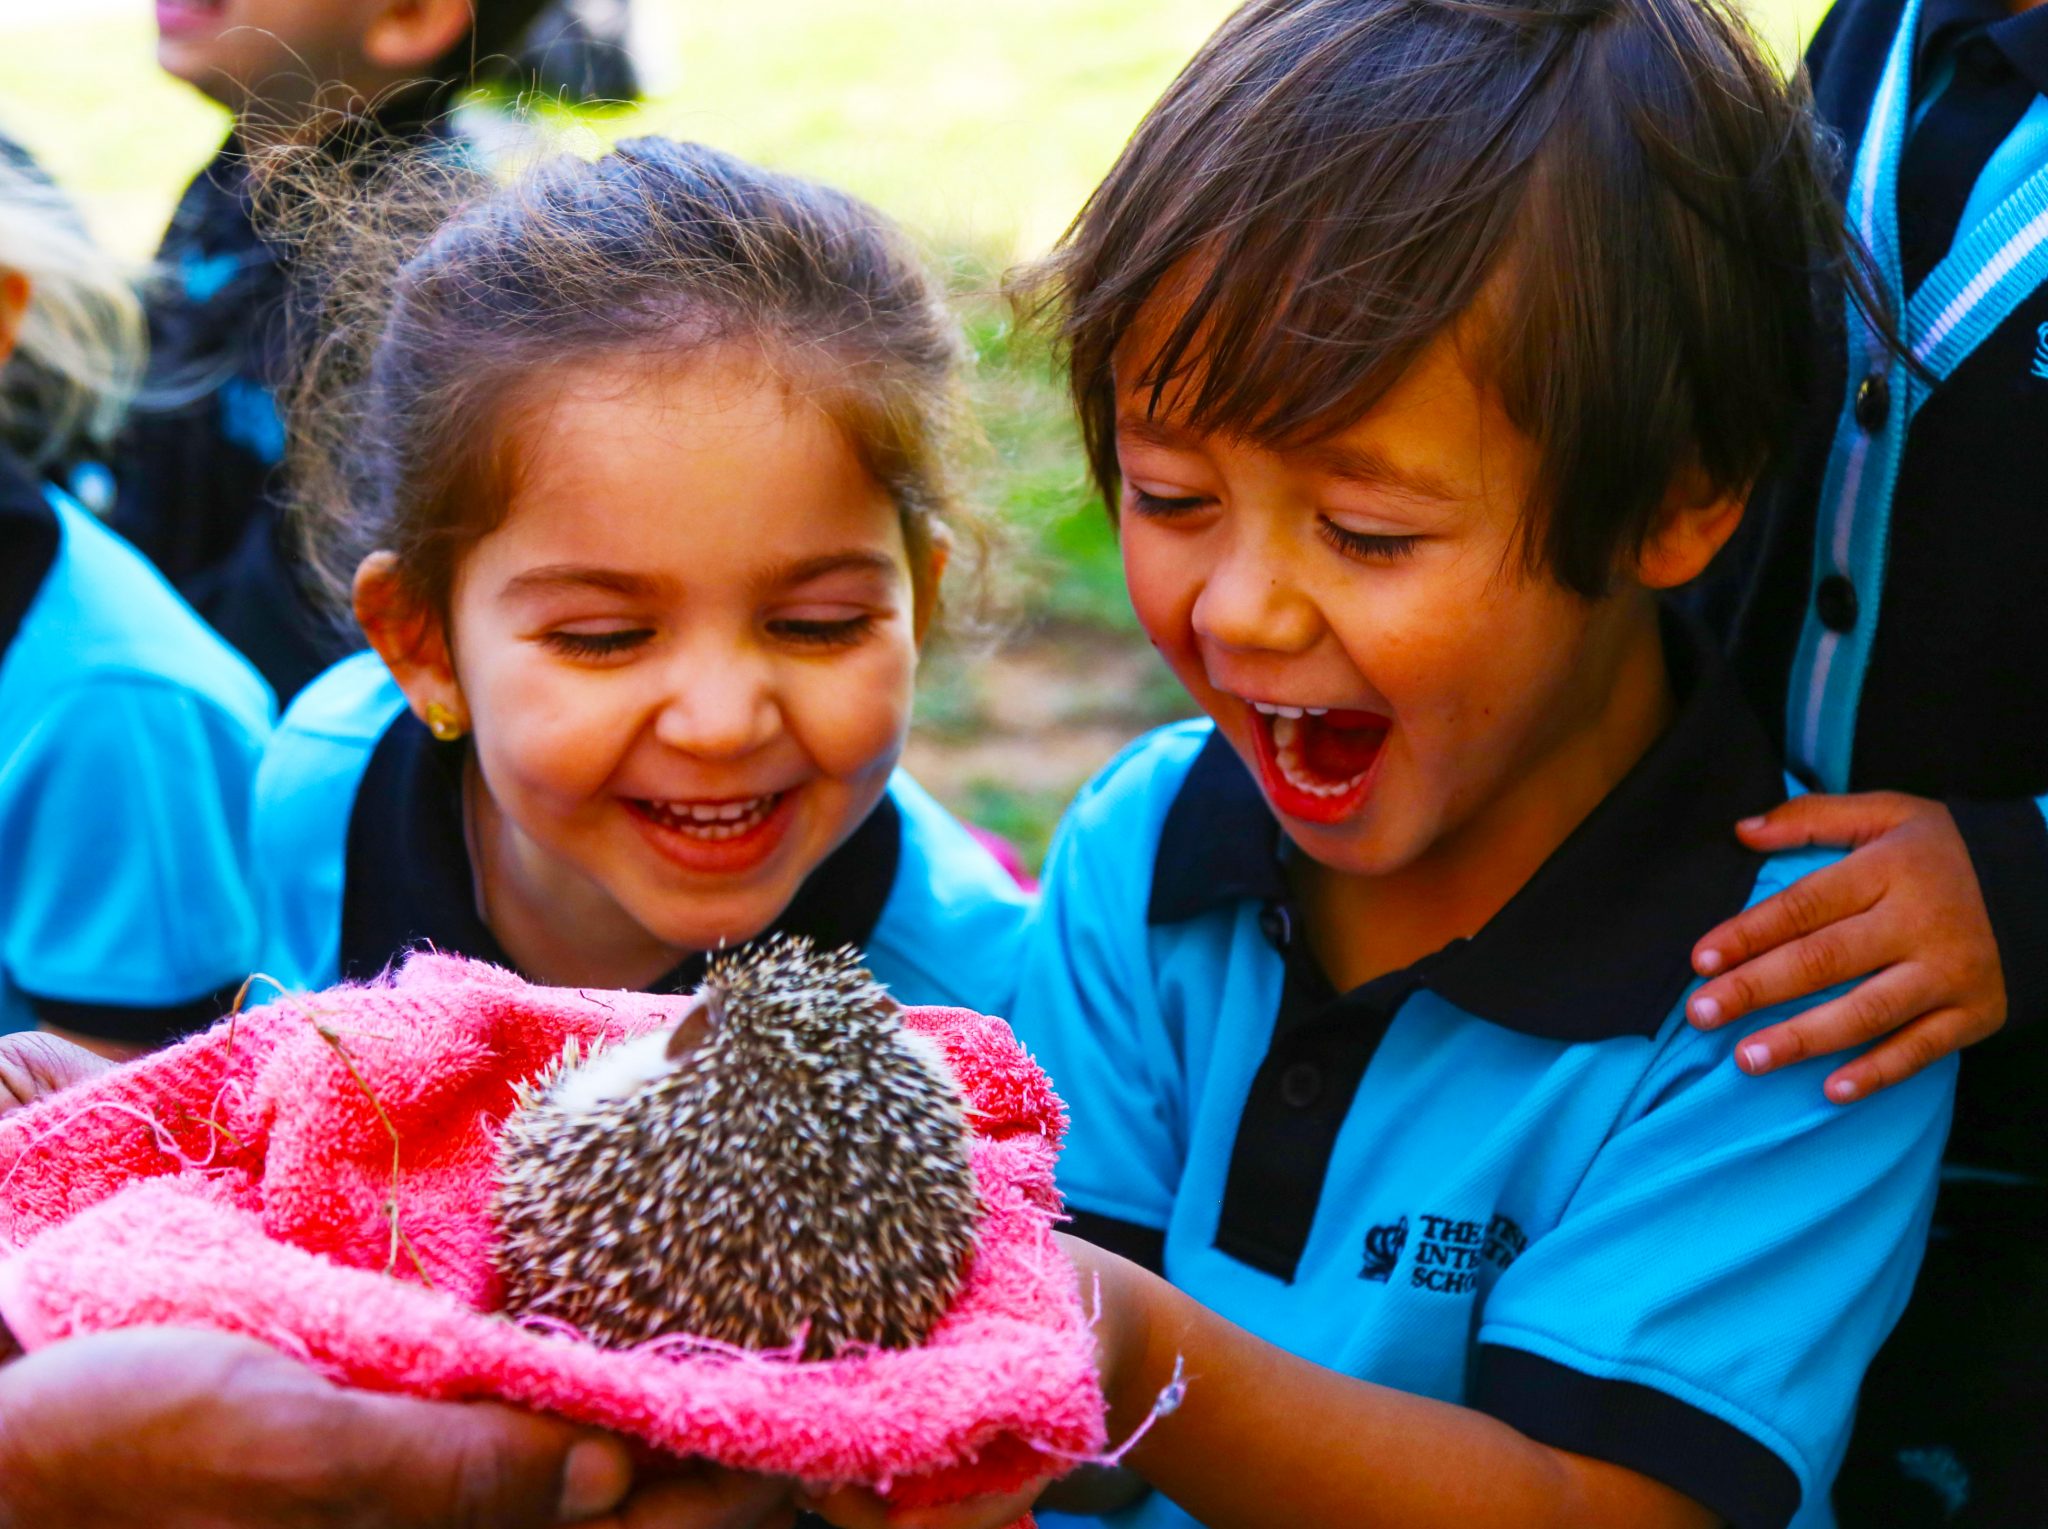 Children at the British International School Abu Dhabi learning about nature with a baby hedgehog